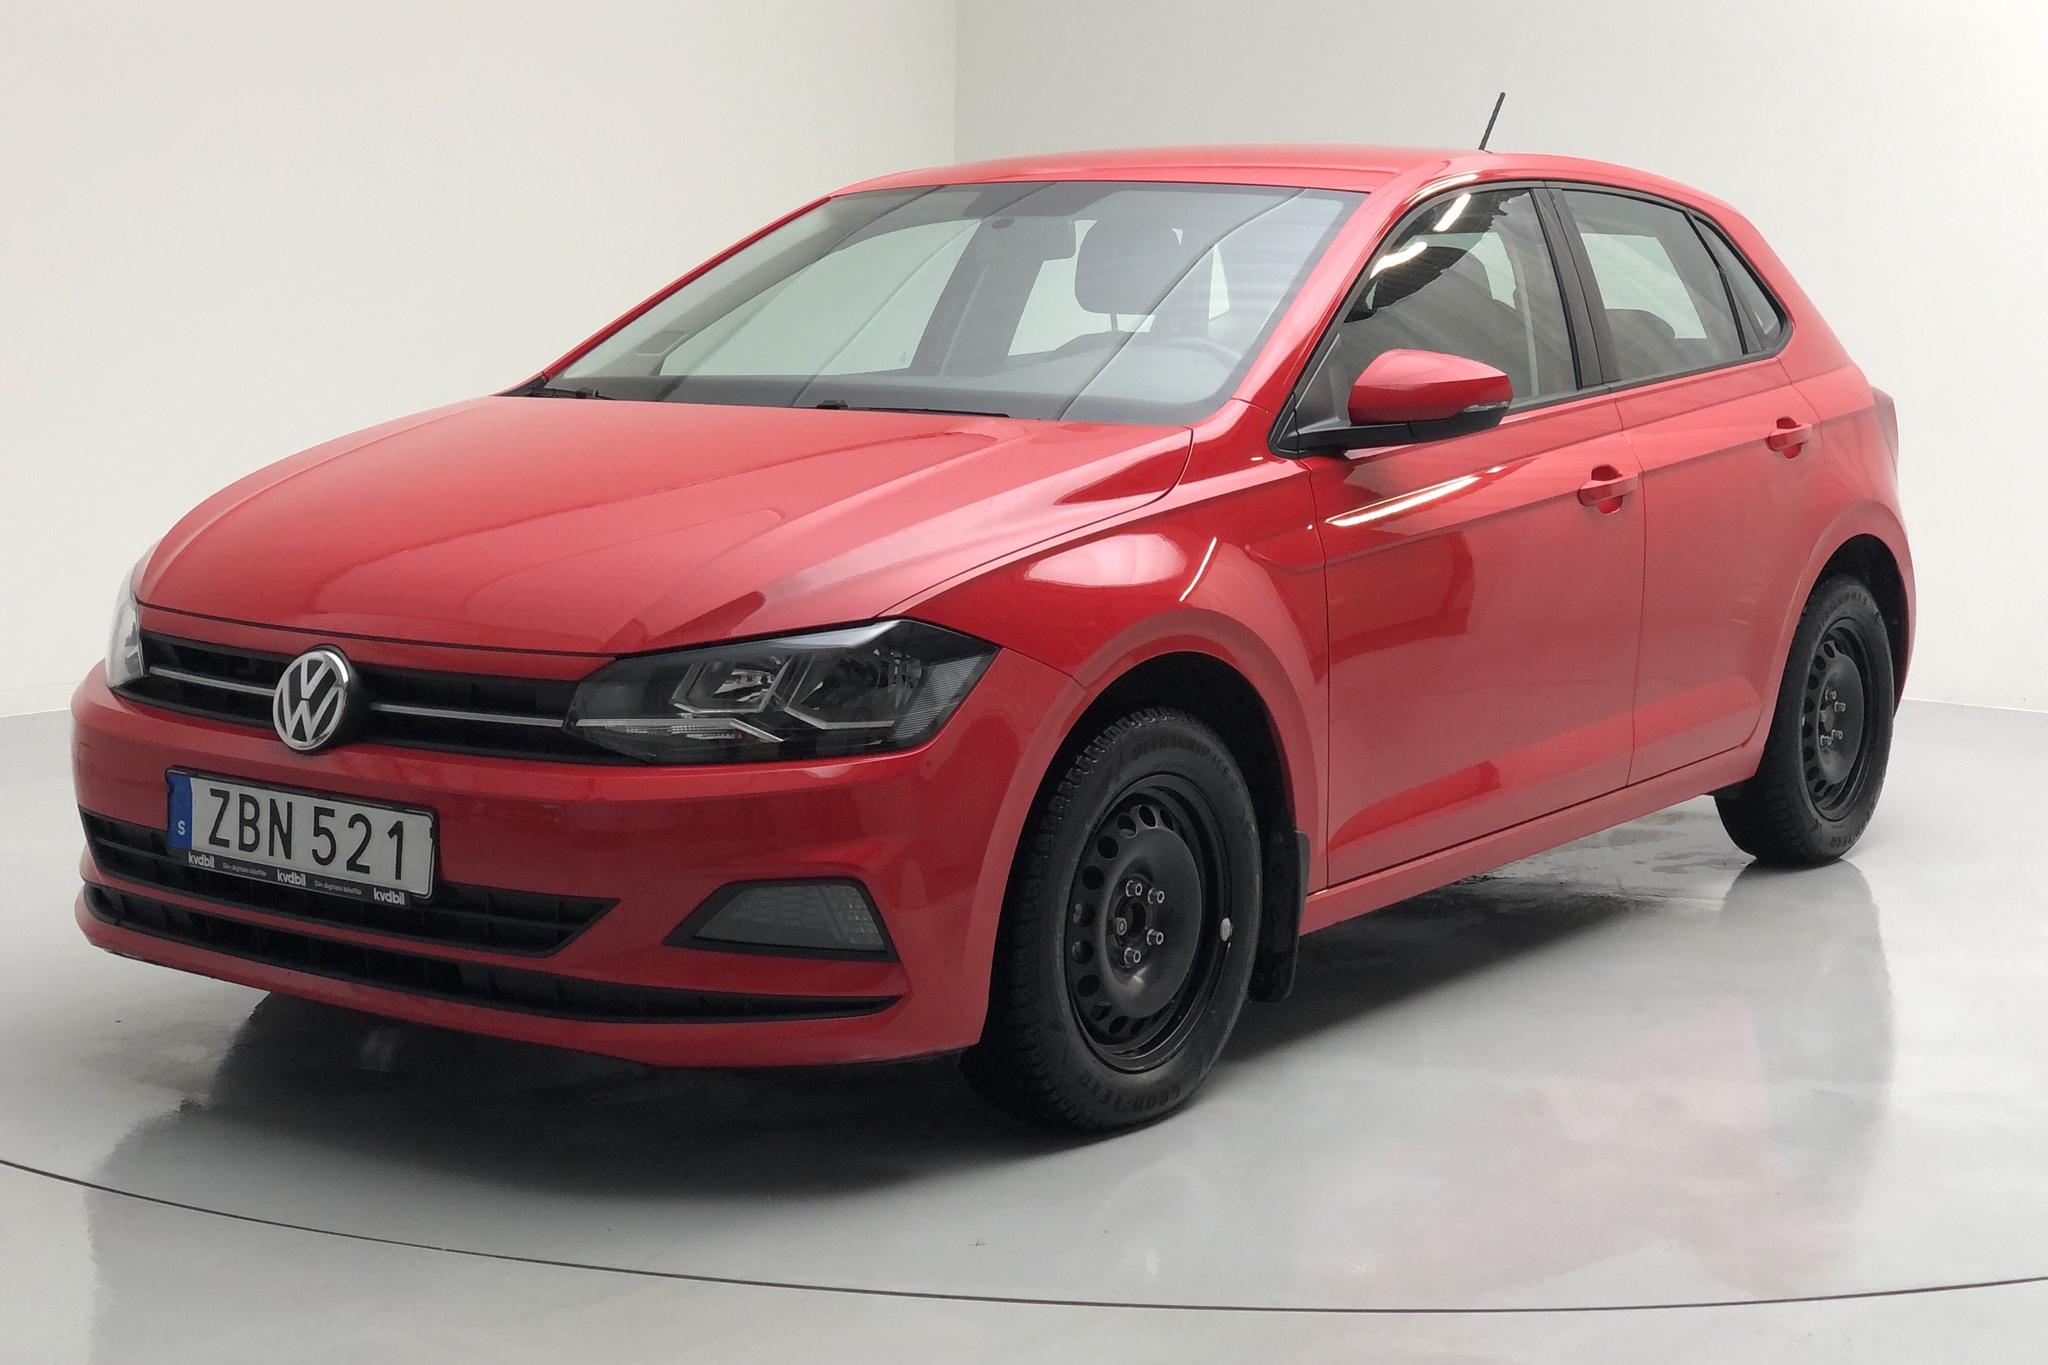 VW Polo 1.0 TSI 5dr (95hk) - 23 080 km - Automatic - red - 2018